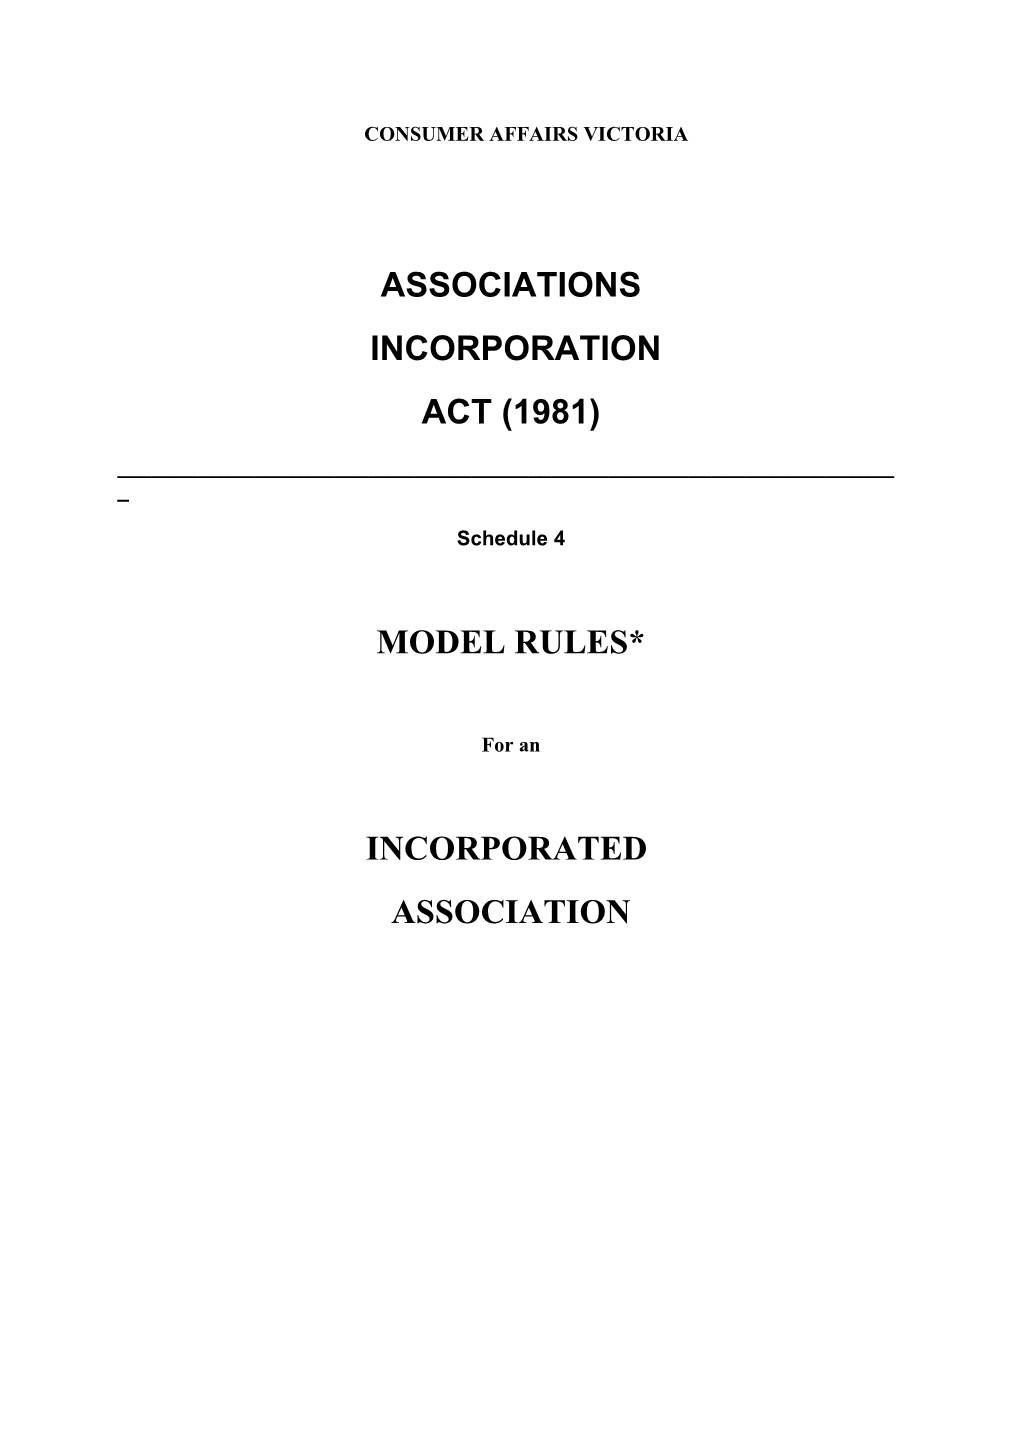 Model Rules for an Incorporated Association